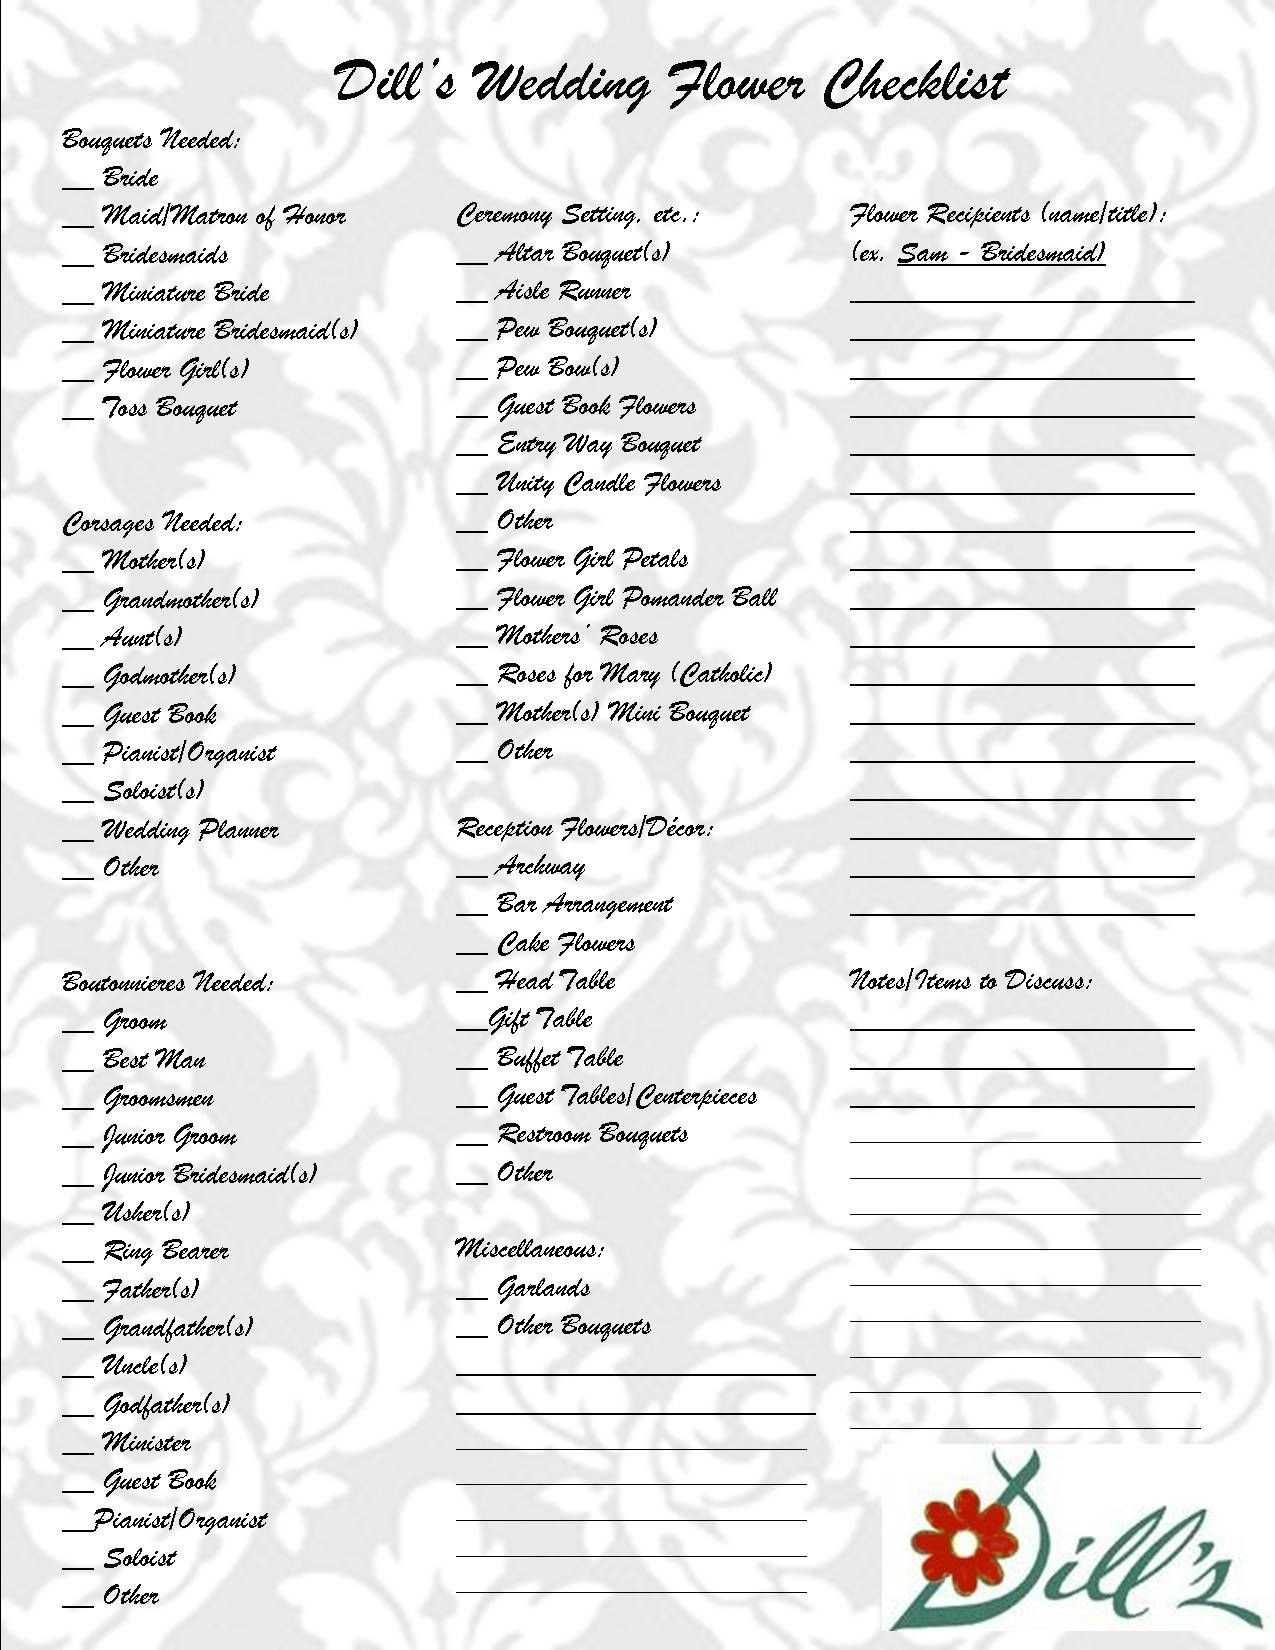 Wedding Flower Checklist Template Pin by Yesidomariage On Blog De Mariage In 2019